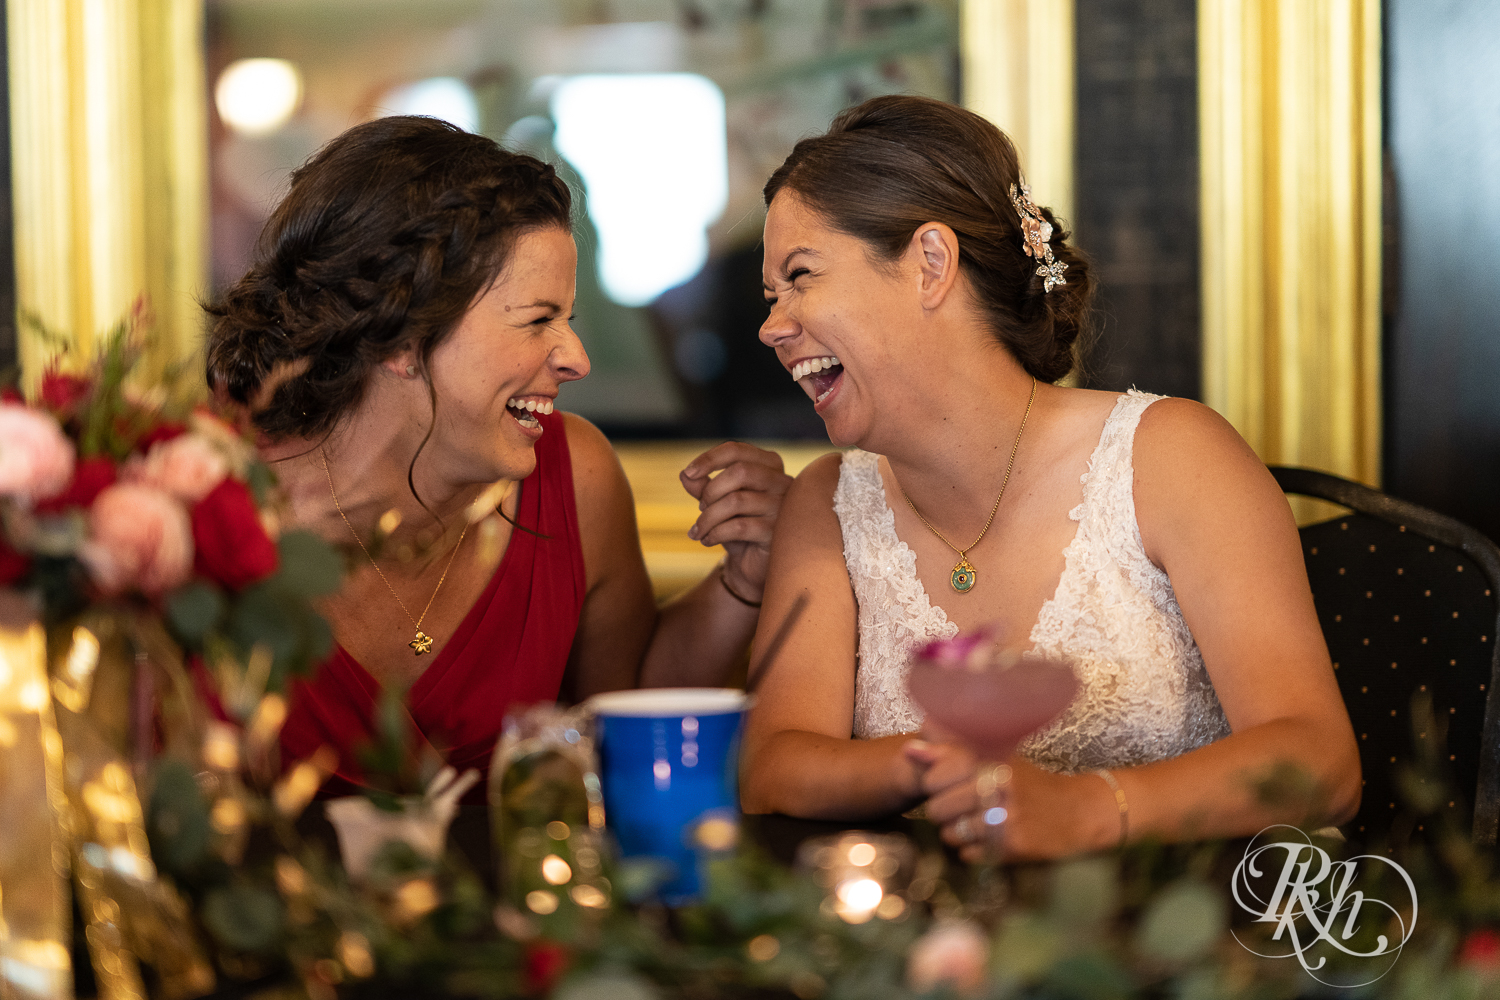 Bride and bridesmaid laugh at wedding reception at Kellerman's Event Center in White Bear Lake, Minnesota.